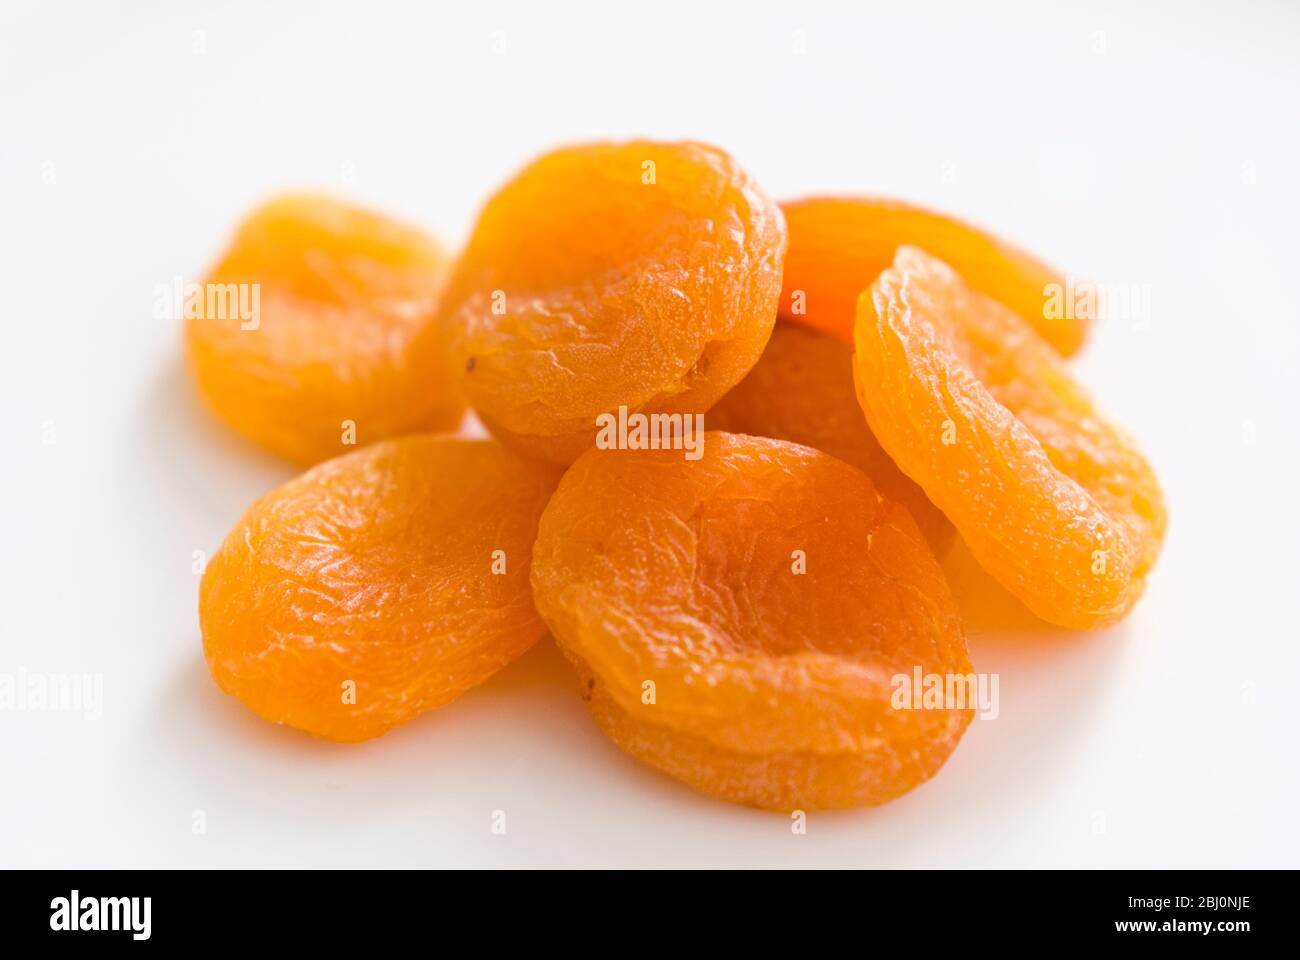 Small pile of dried apricots on white surface - Stock Photo